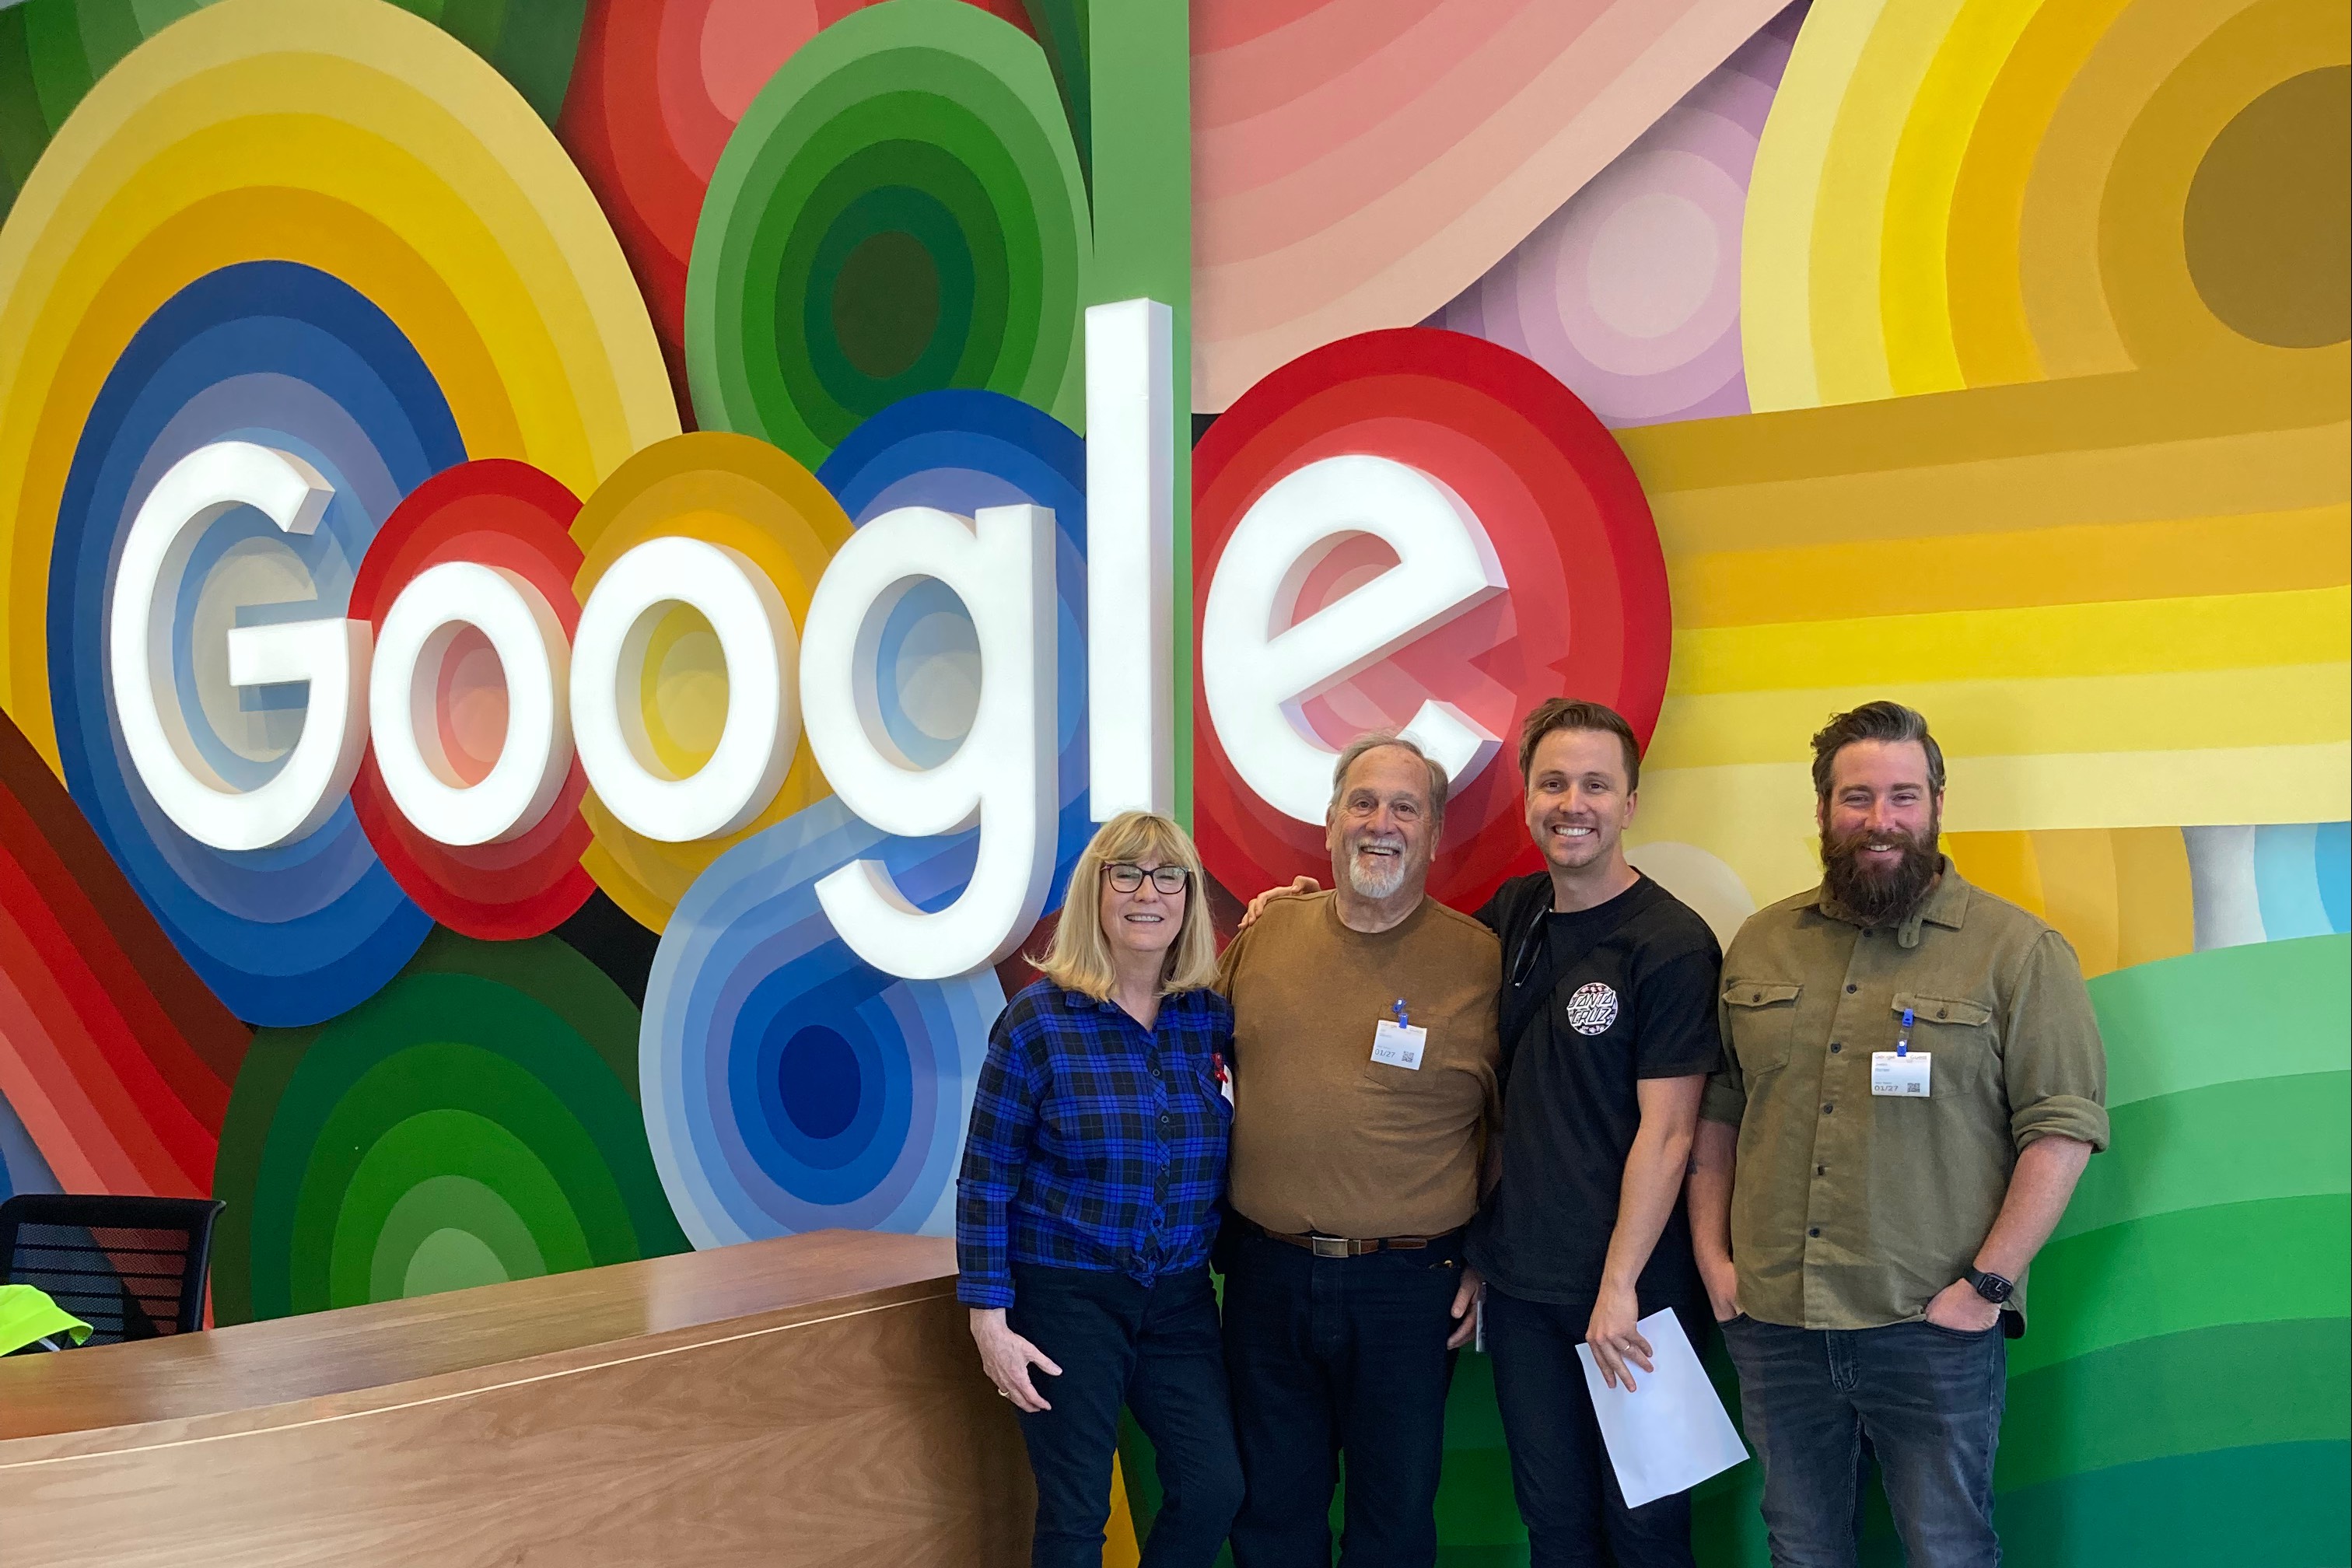 nicky with his coworkers outside a giant google sign